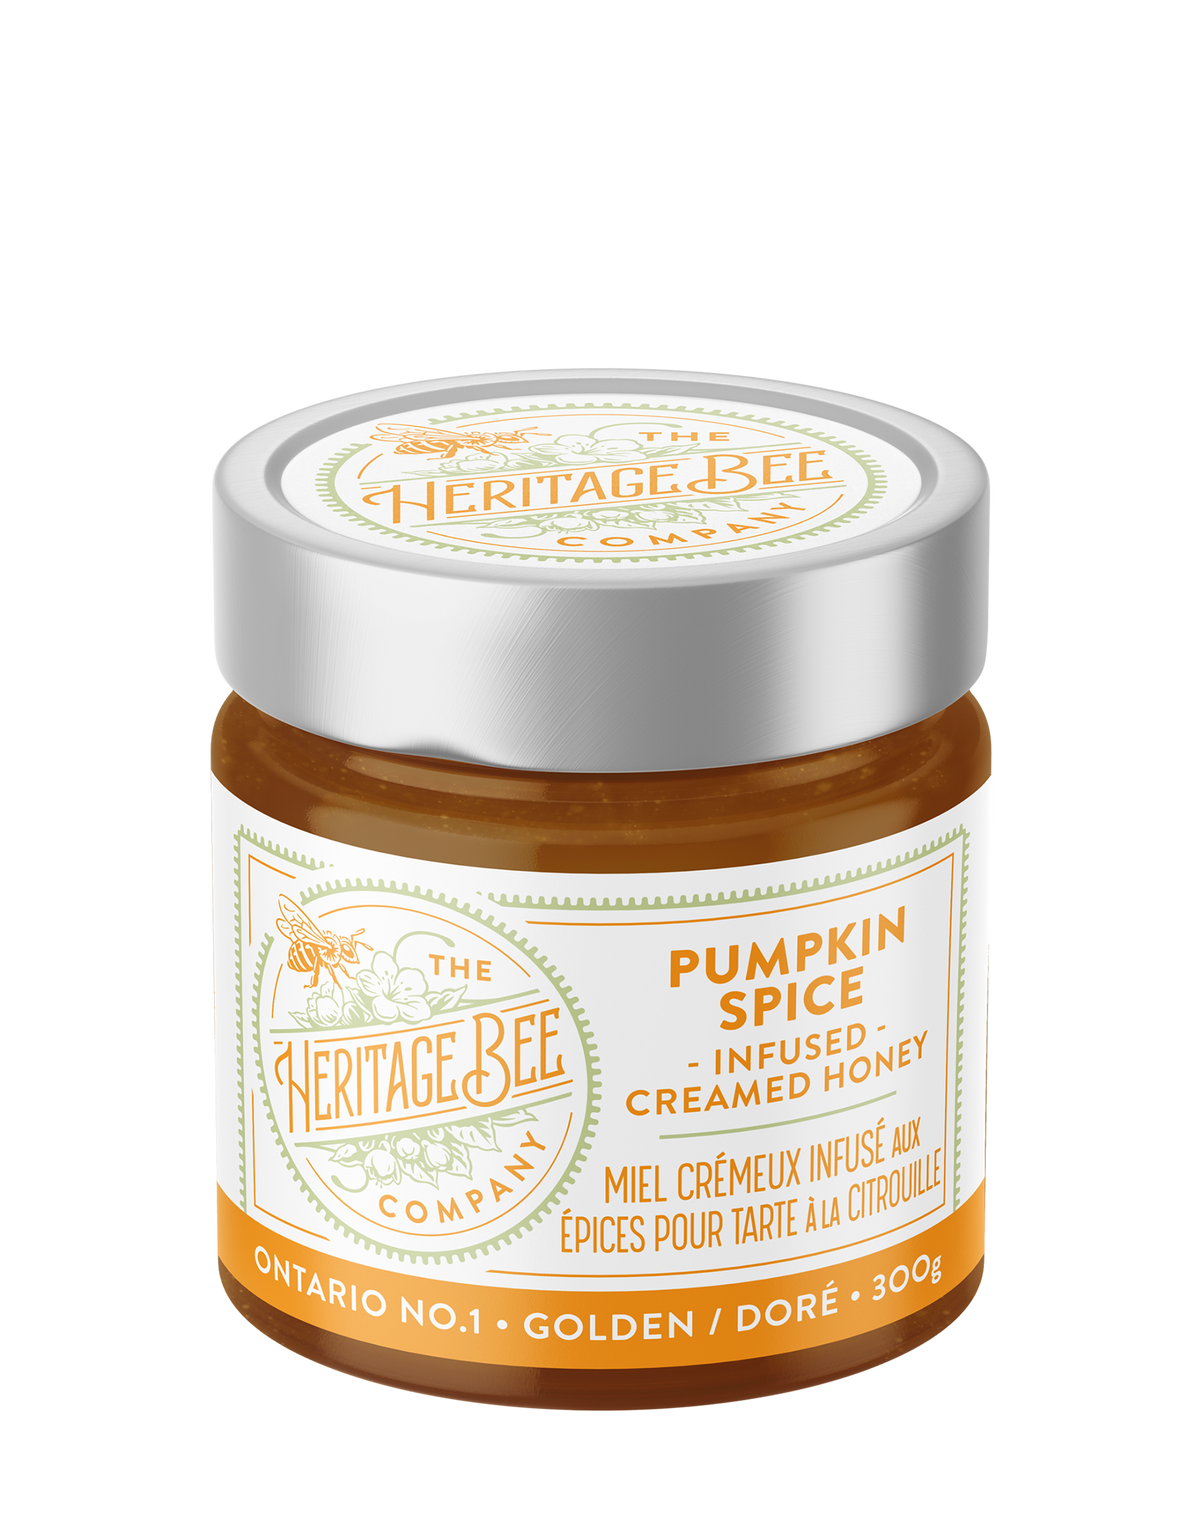 Heritage Bee Co local creamed wildflower honey infused with pumpkin spice. Handcrafted in Ontario and perfect for fall. Premium. Gourmet.